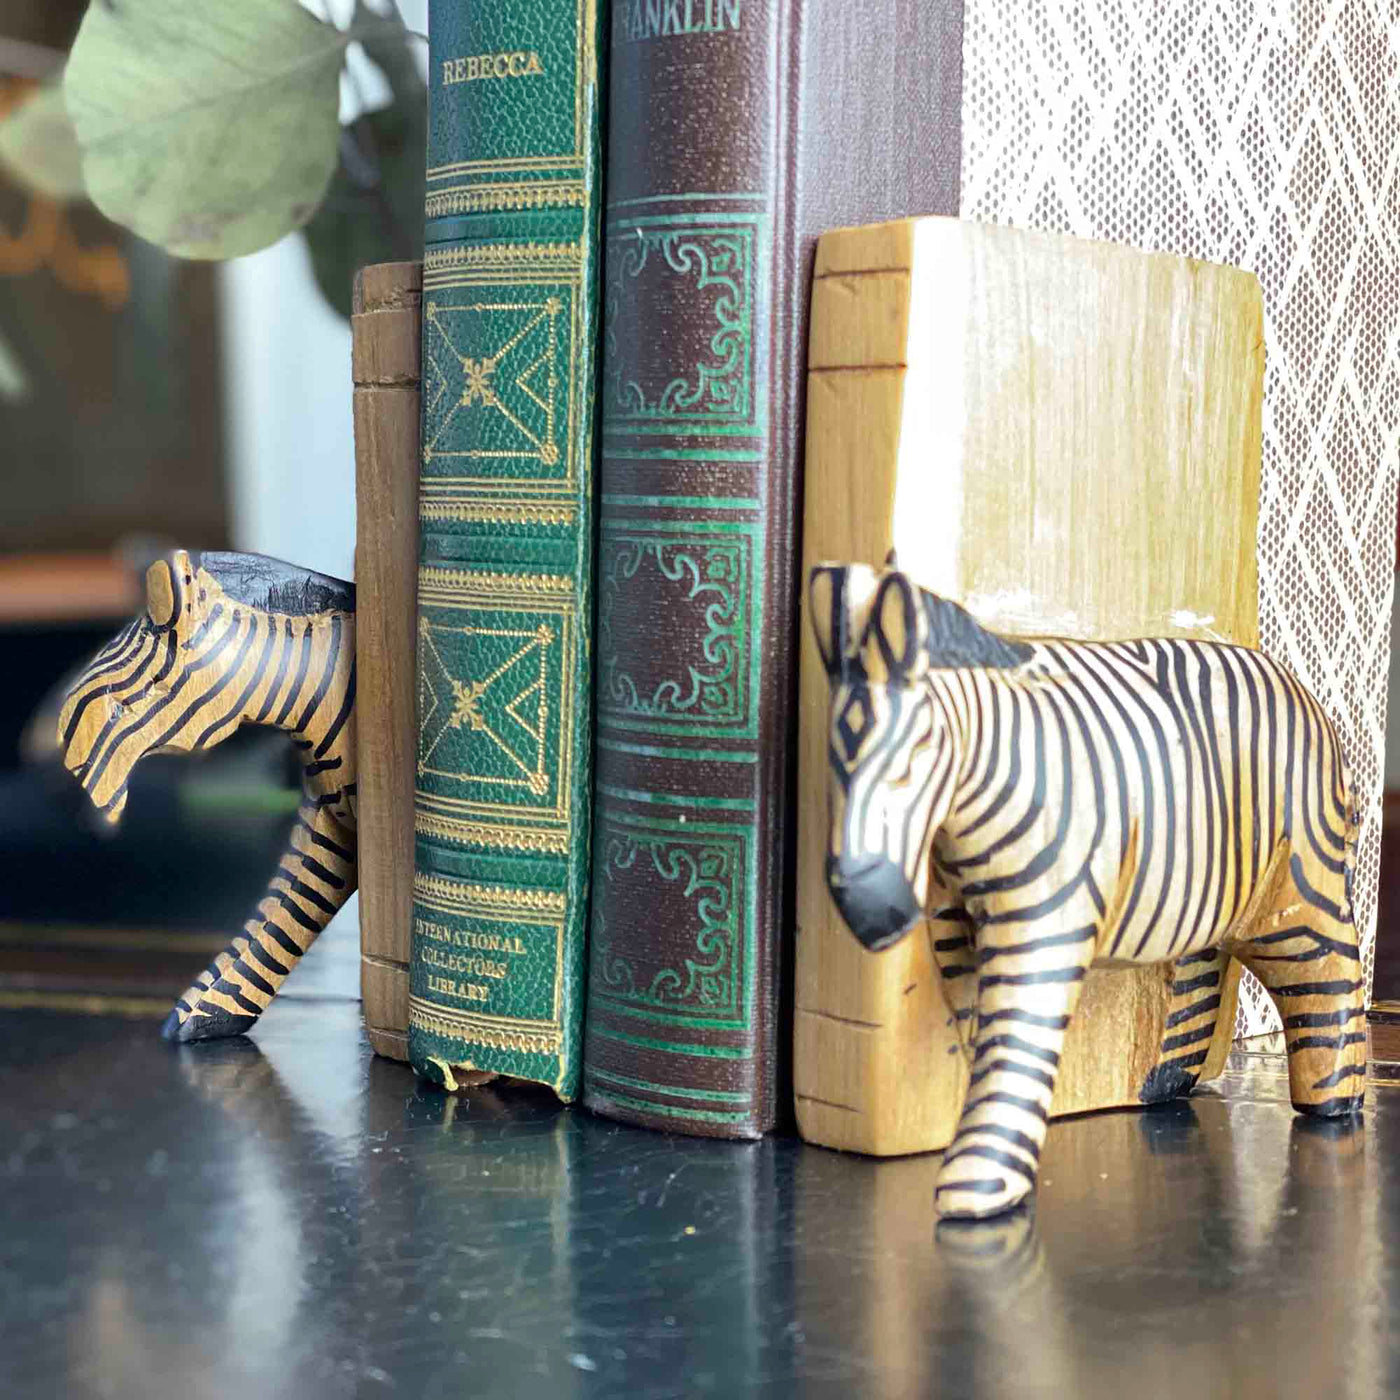 Carved Wood Zebra Book Ends, Set of 2 - Yvonne’s 100th Wish Inc